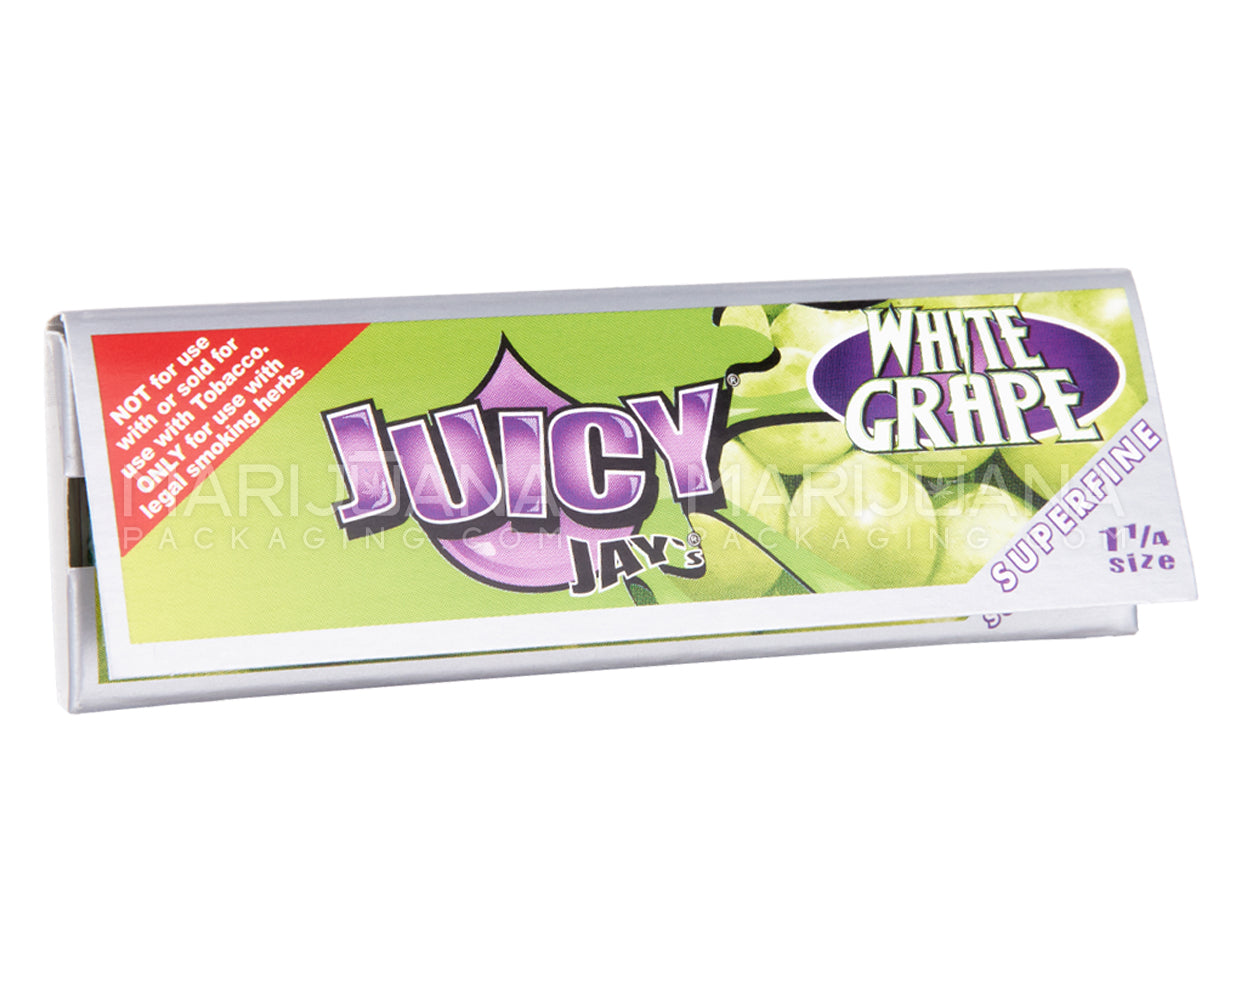 JUICY JAY'S | 'Retail Display' 1 1/4 Size Hemp Rolling Papers | 76mm - White Grape - 24 Count - 3